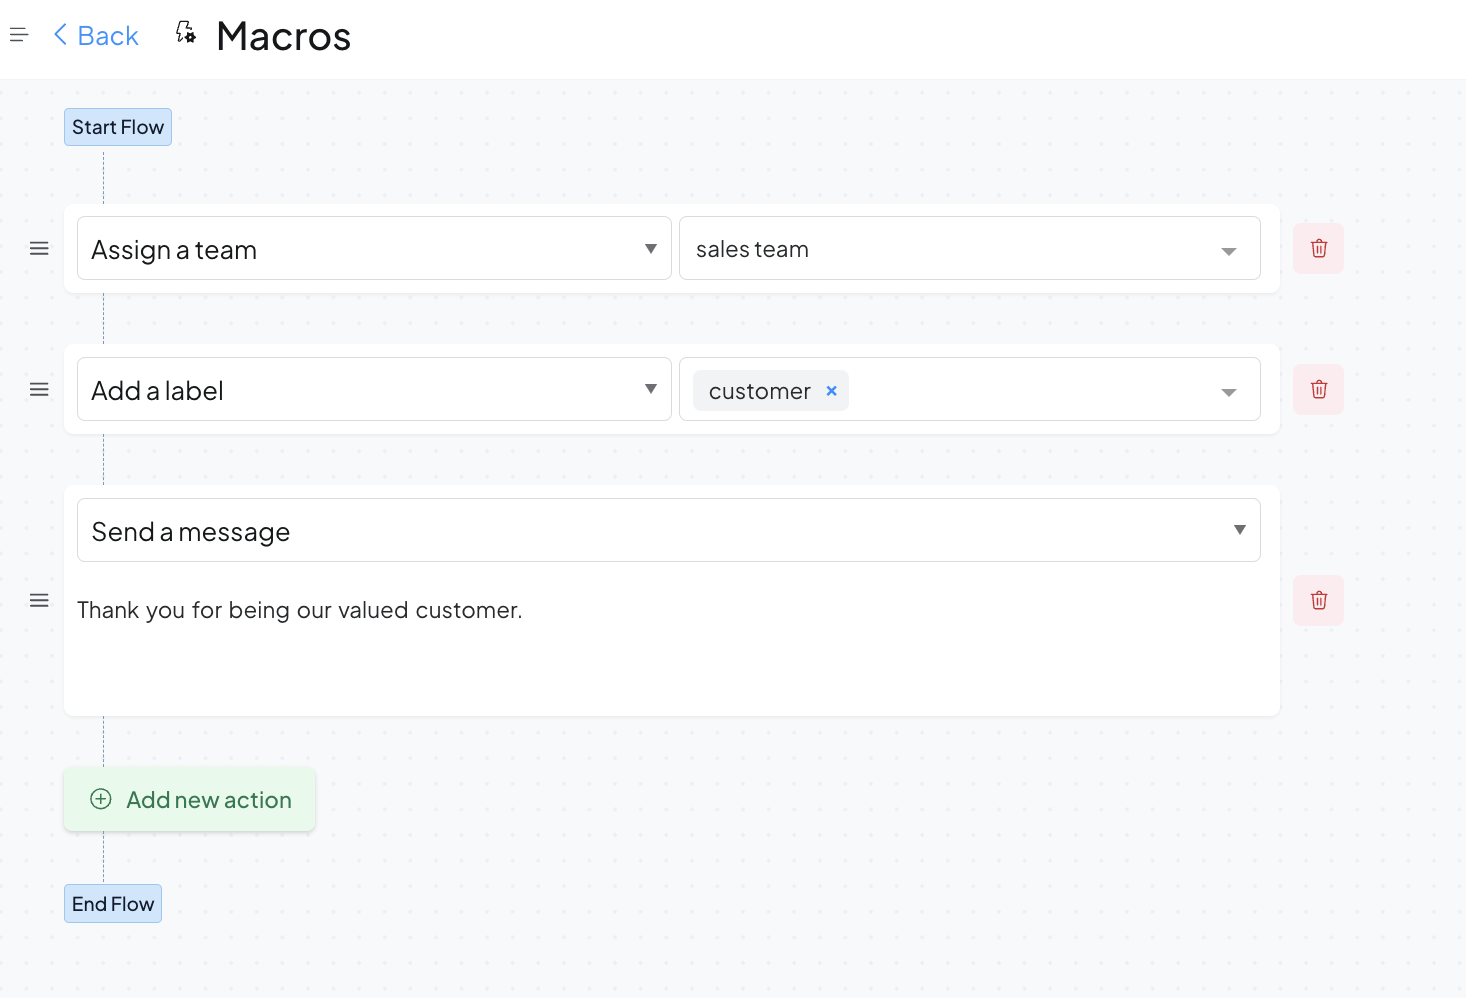 OneHash Chat Software - Macros are shortcuts for customer service agents, bundling tasks like tagging, emailing, and updating in one click. It  boosts efficiency by helping agents repeat actions easily and aid in onboarding new team members with pre-set steps.